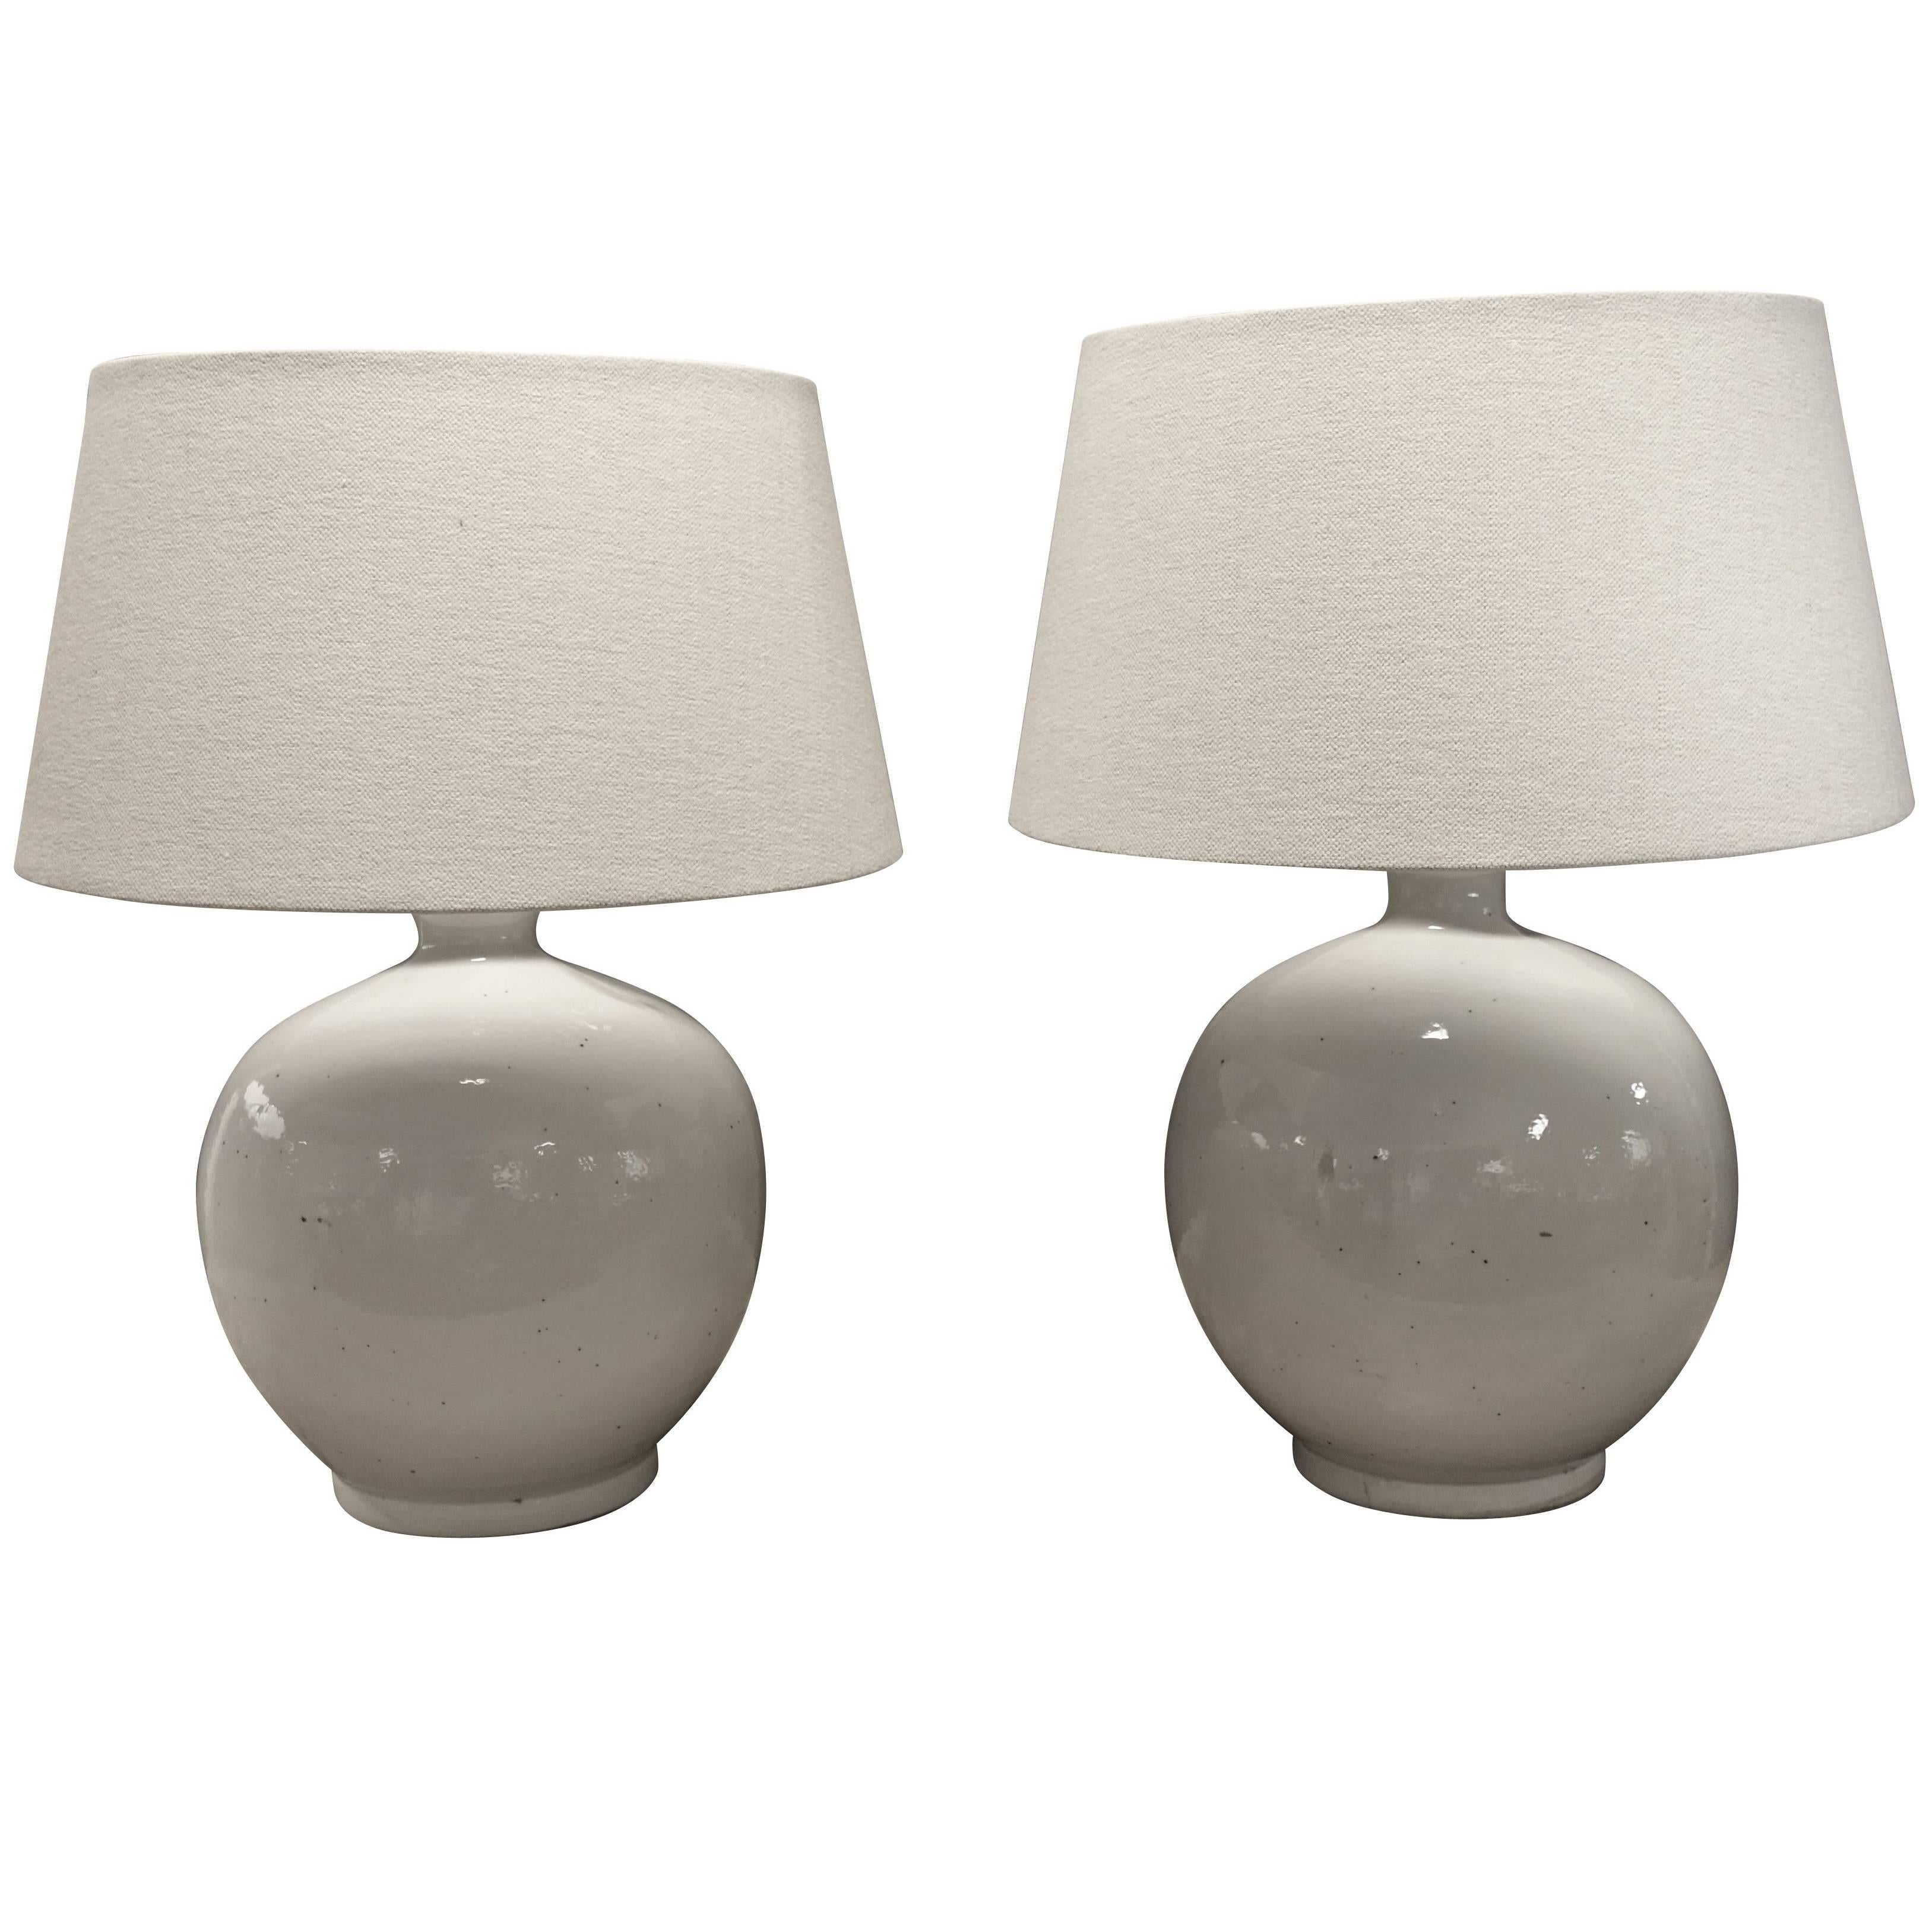 Pair of Round White Lamps, China, Contemporary